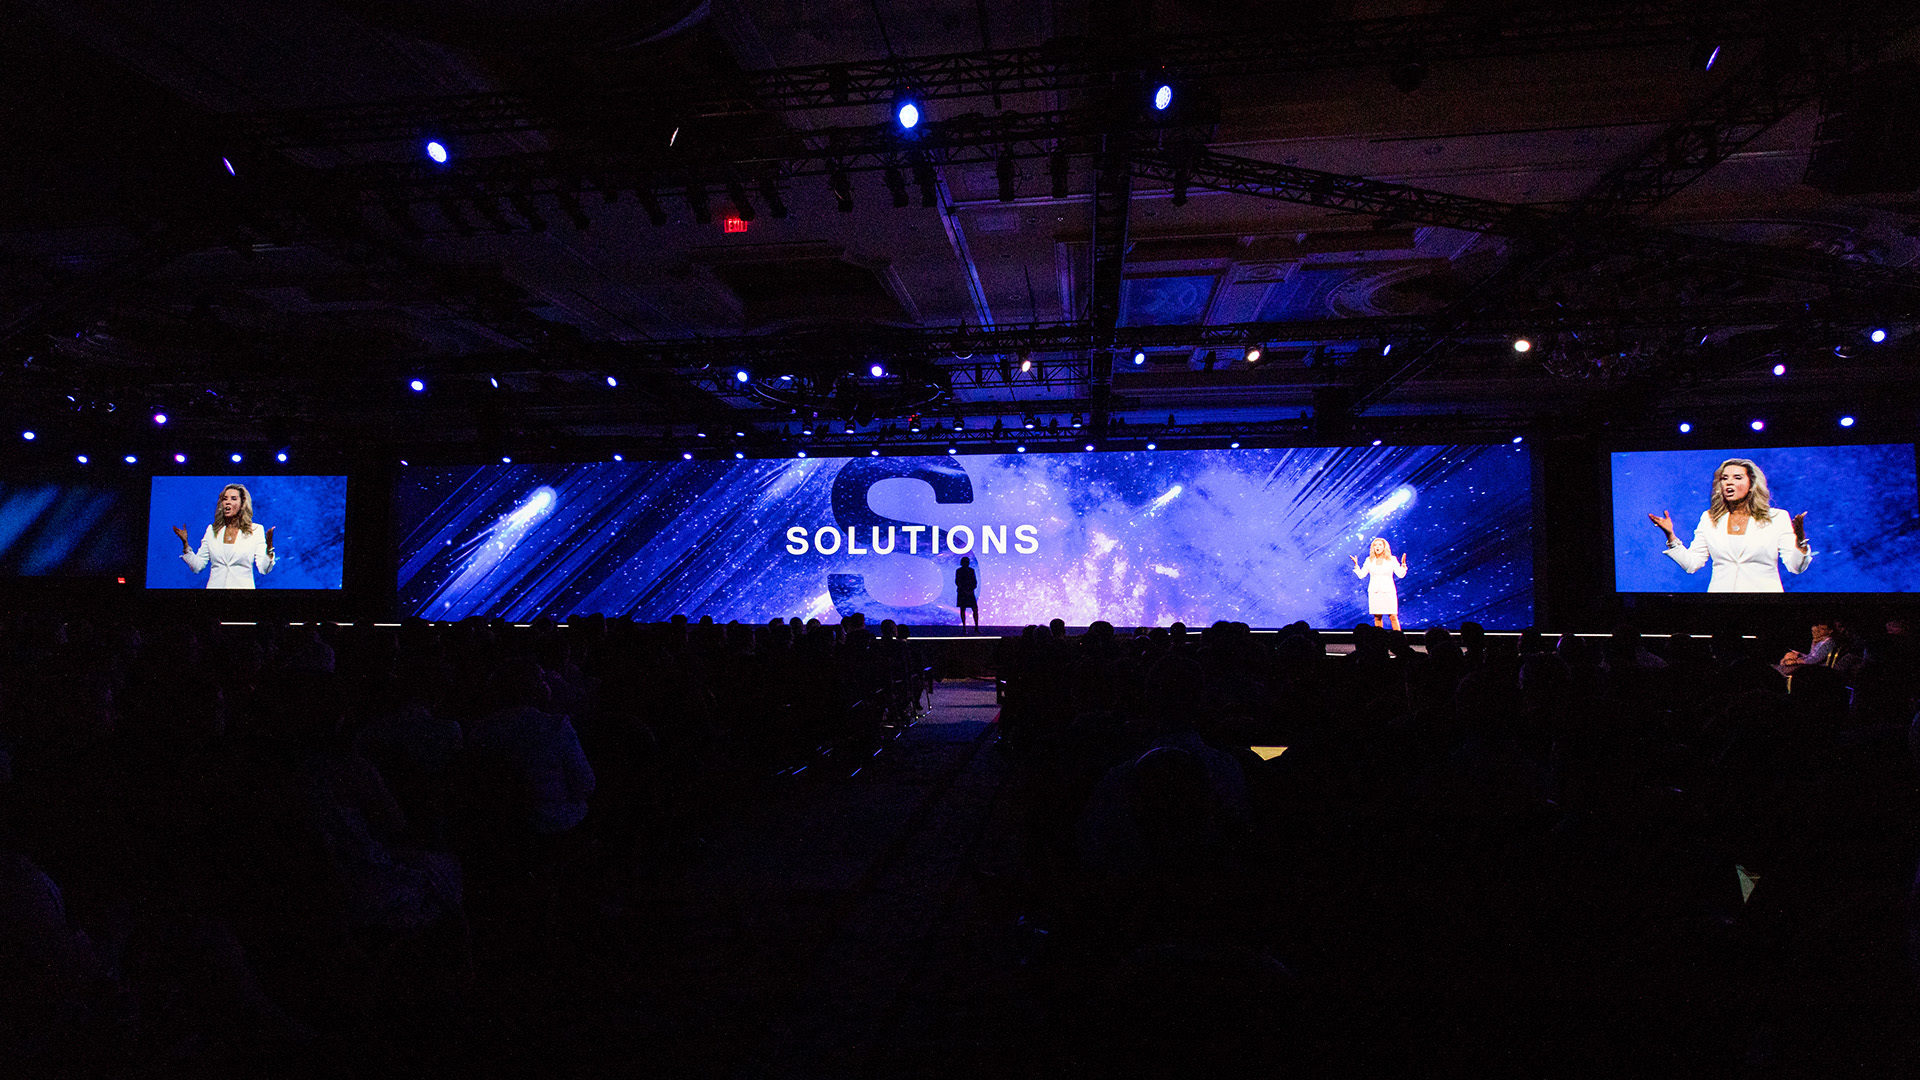 View of the main stage from the back of the room. The woman is speaking in front of a large screen with graphics that read "solutions."